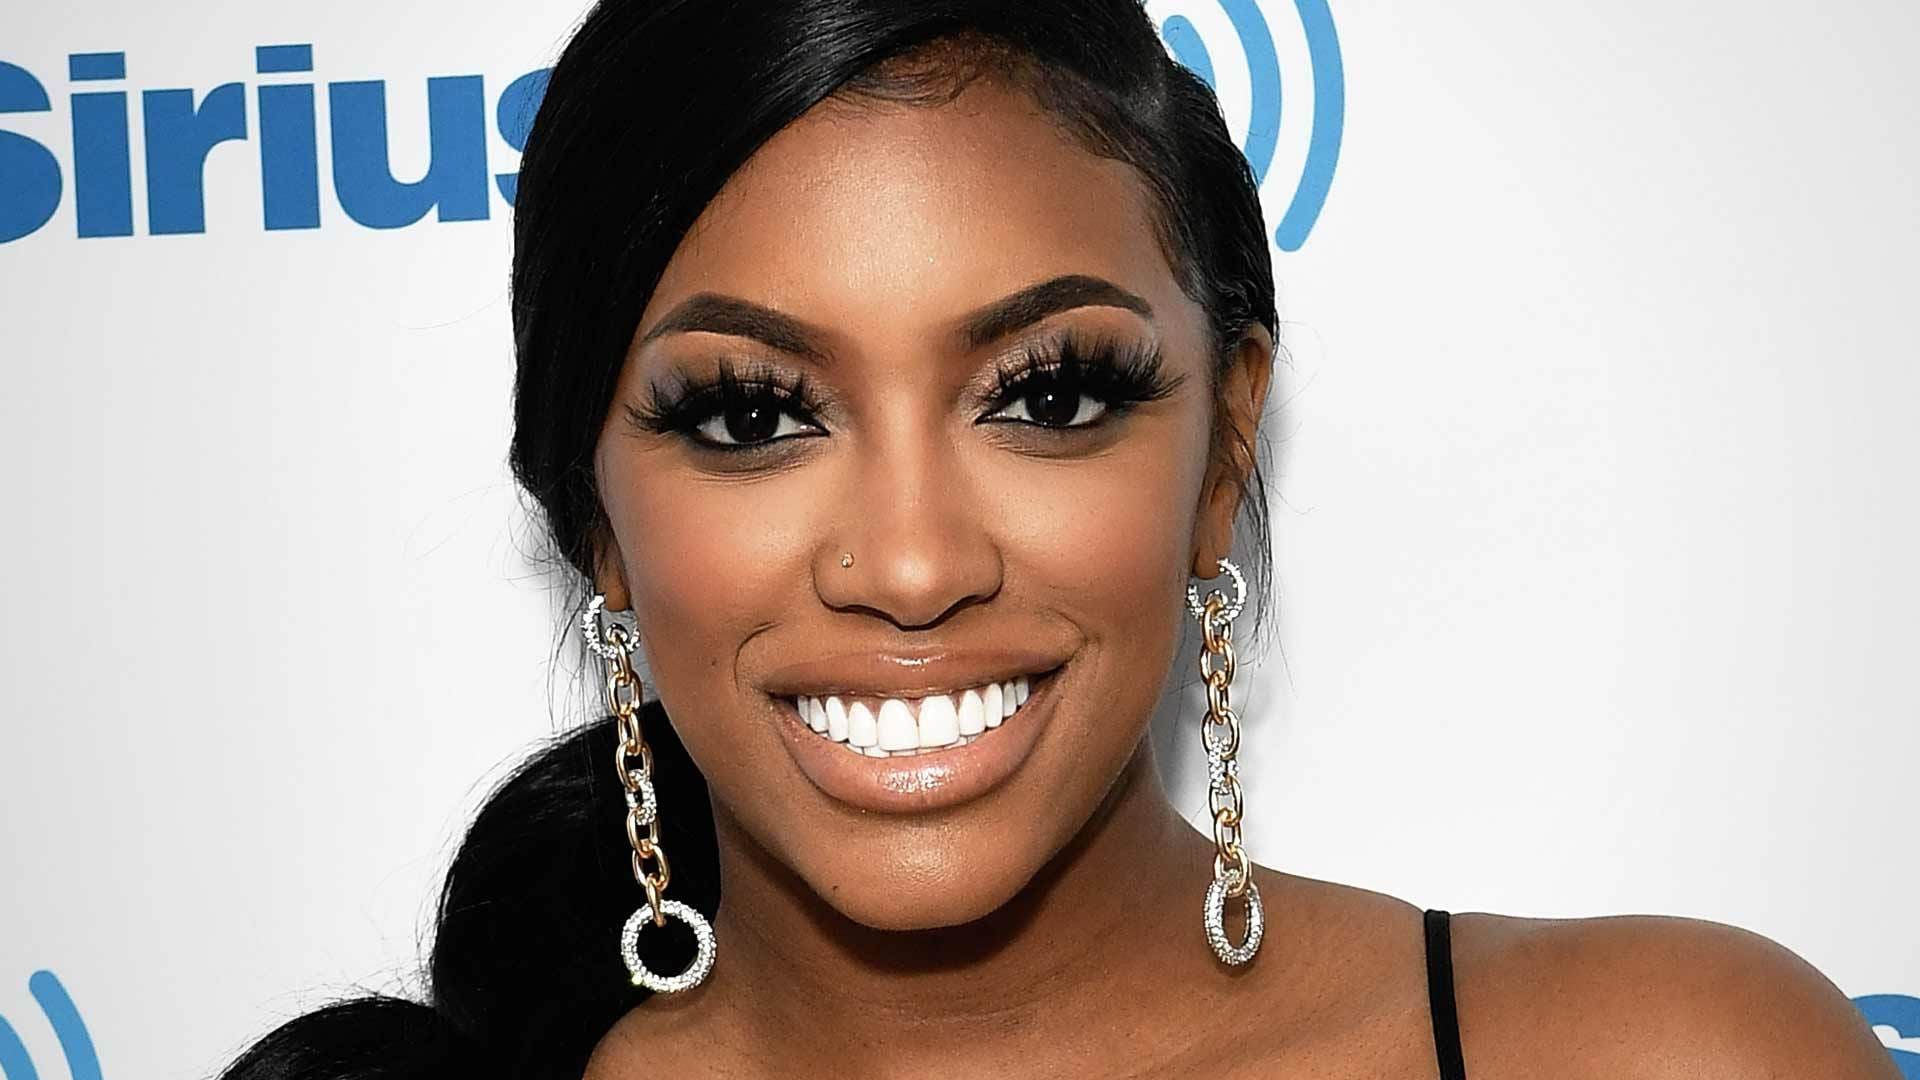 Porsha Williams' Latest Photos In A Flowy White Dress Have Fans In Awe